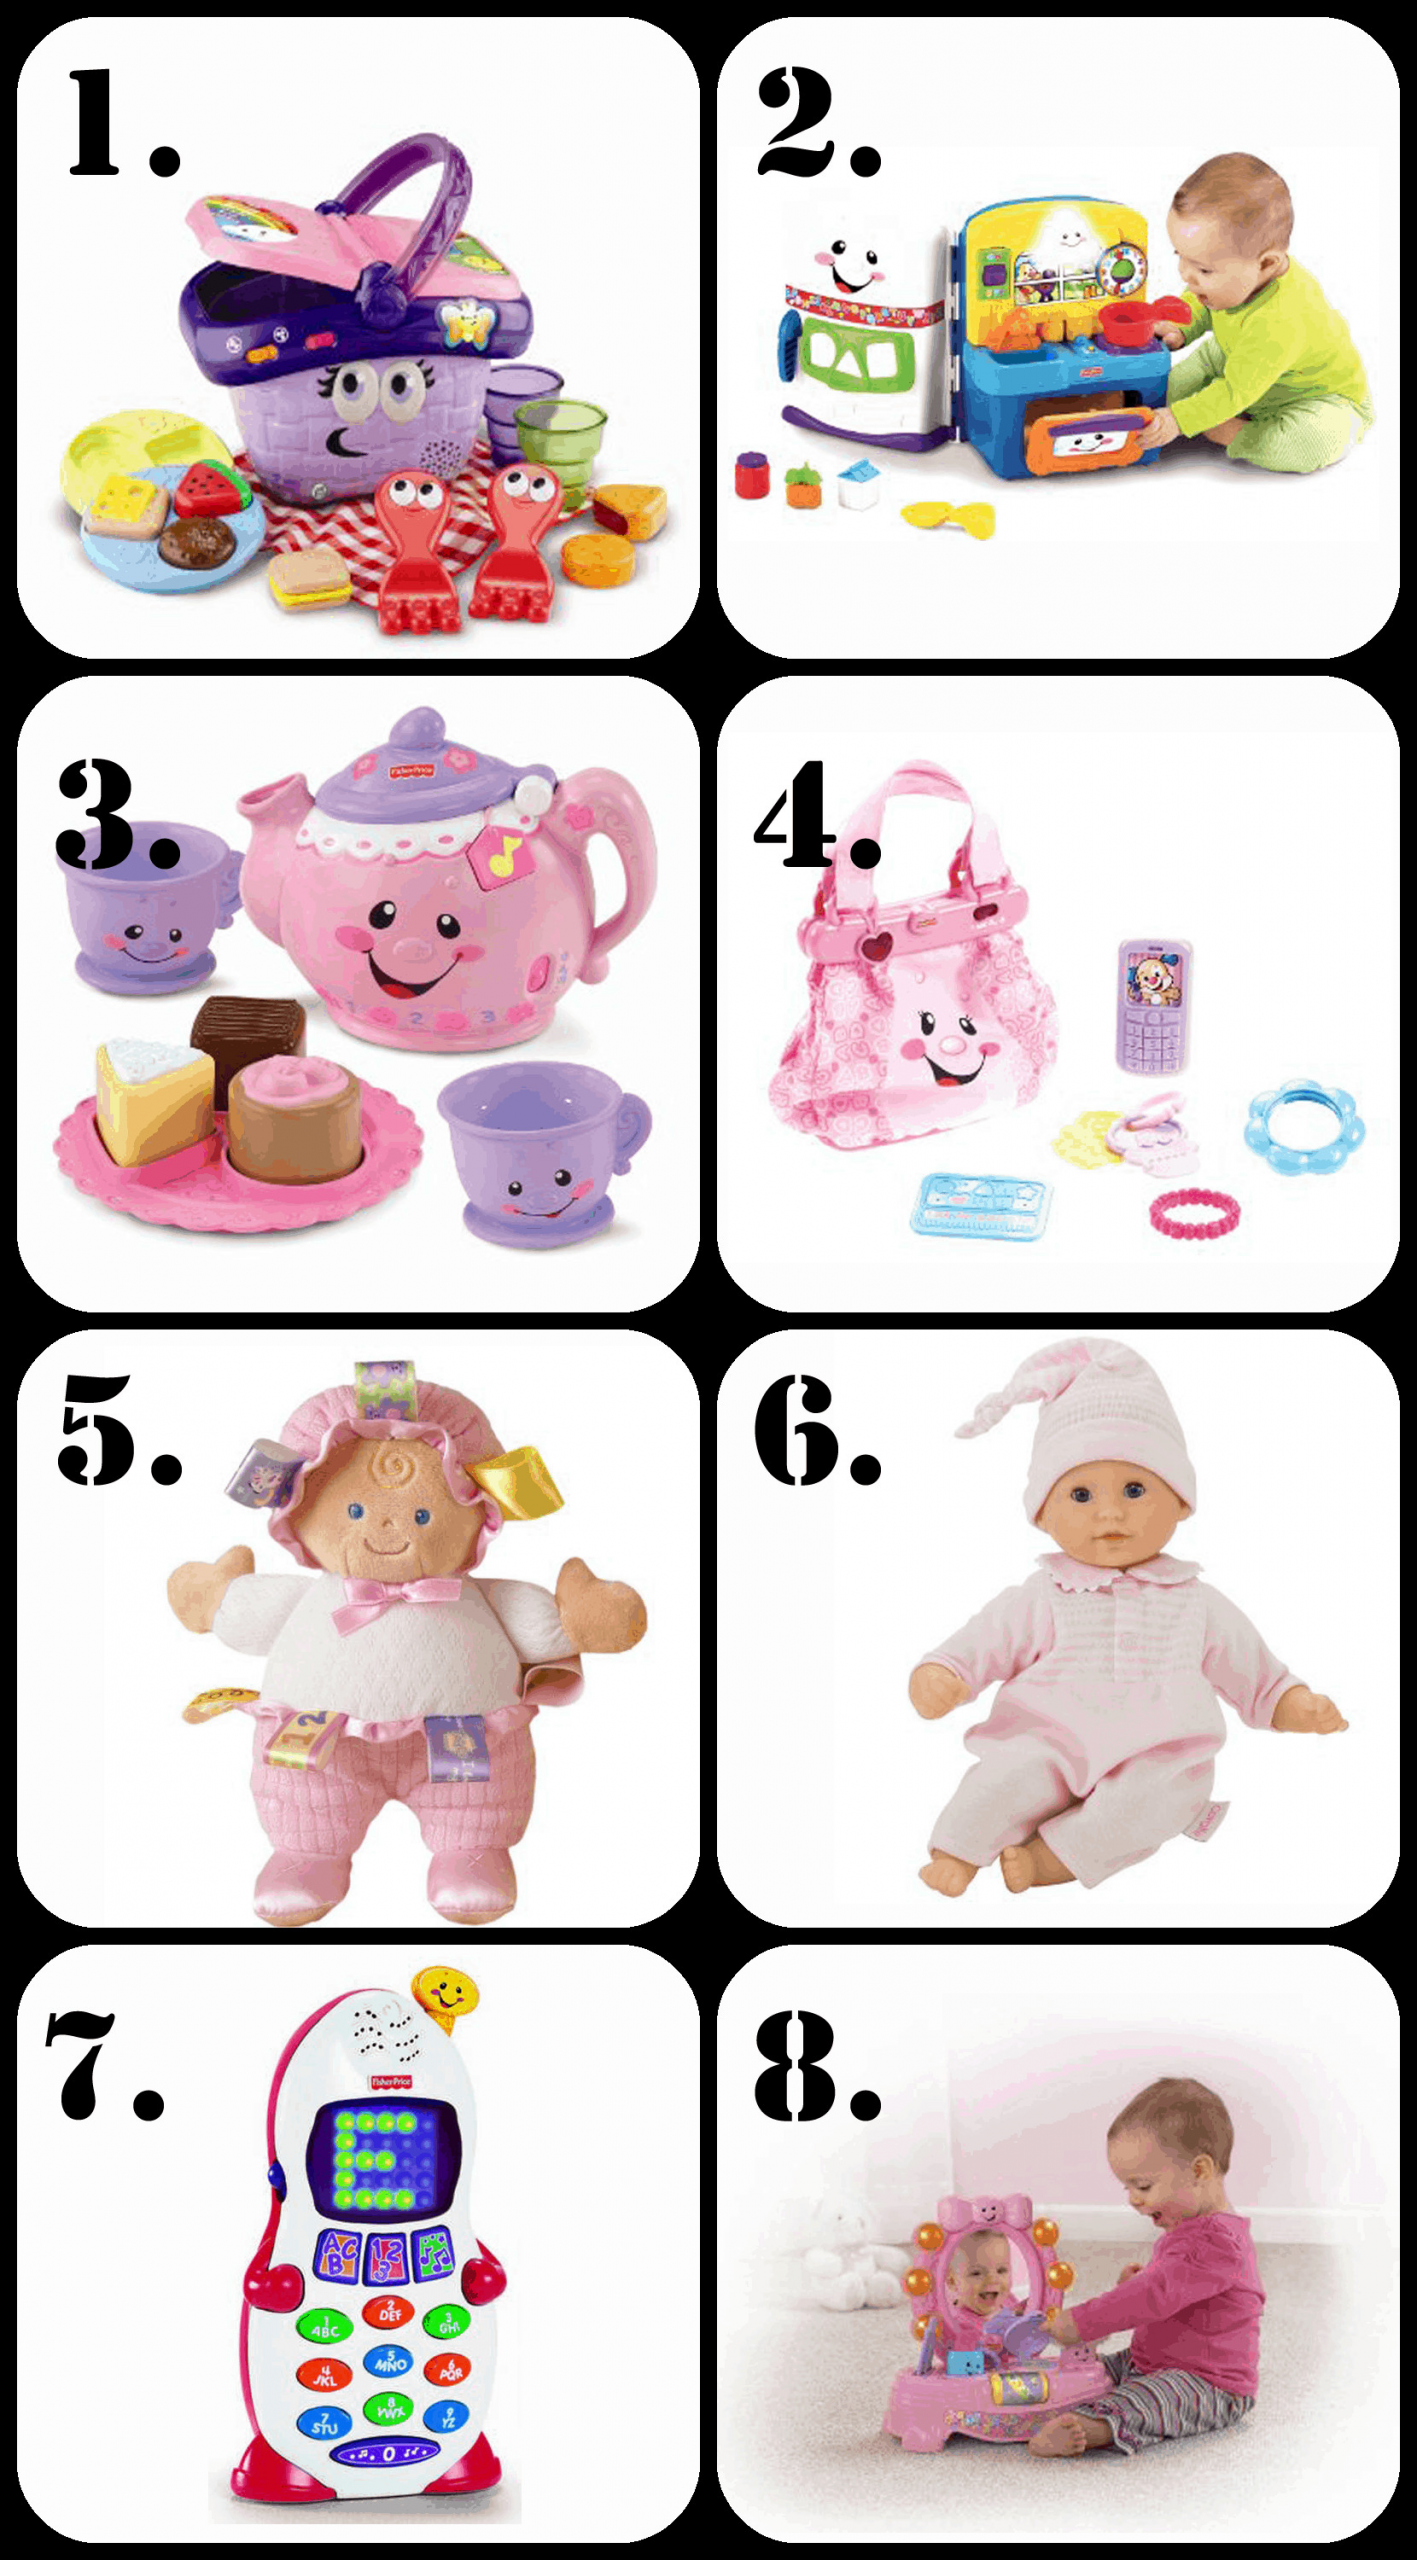 1 Yr Old Girl Birthday Gift Ideas
 The Ultimate List of Gift Ideas for a 1 Year Old Girl